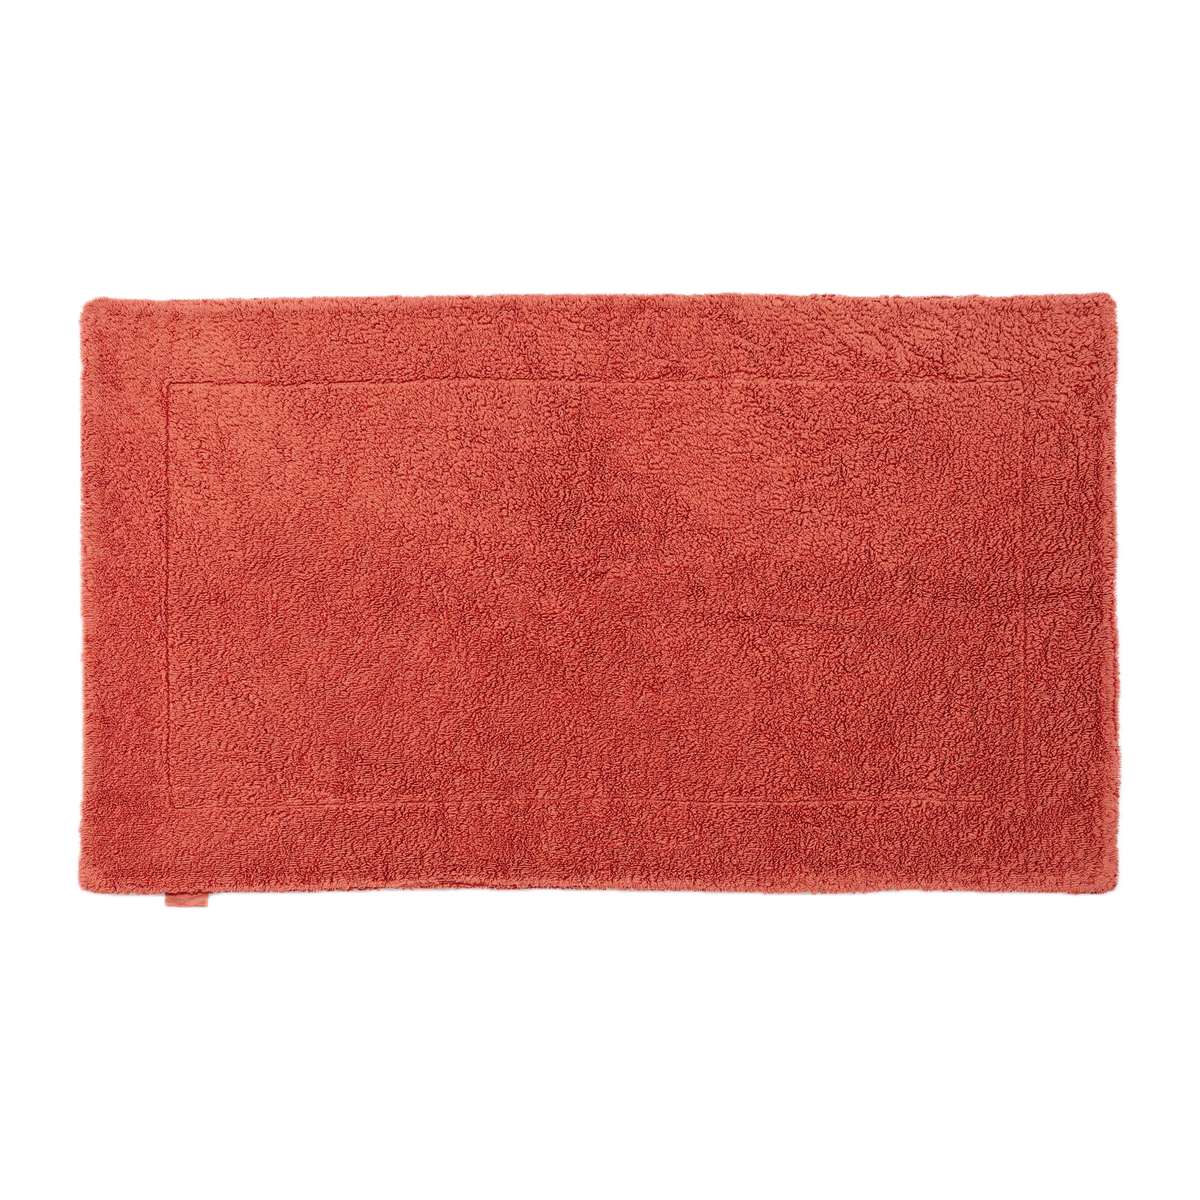 Abyss Super Pile Bath Mat in Chili Color